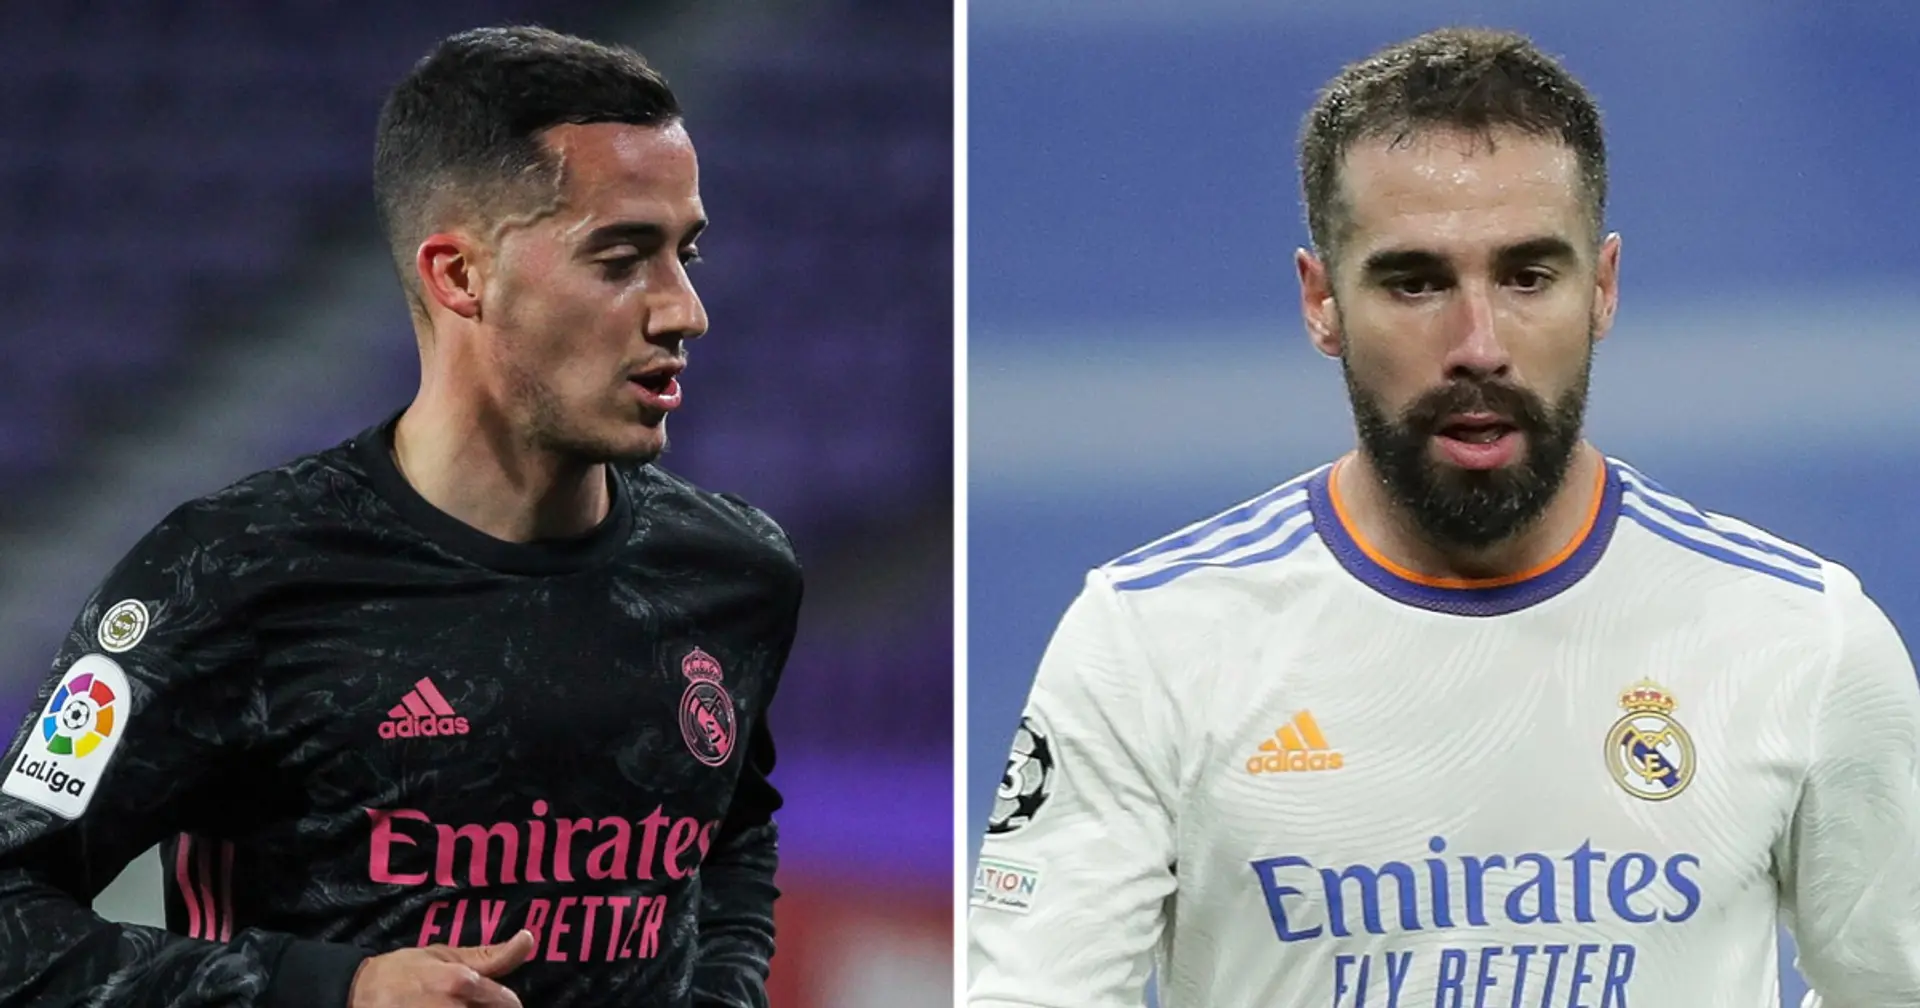 Real Madrid could sign a right-back next summer amid Carvajal injury struggles (reliability: 4 stars)